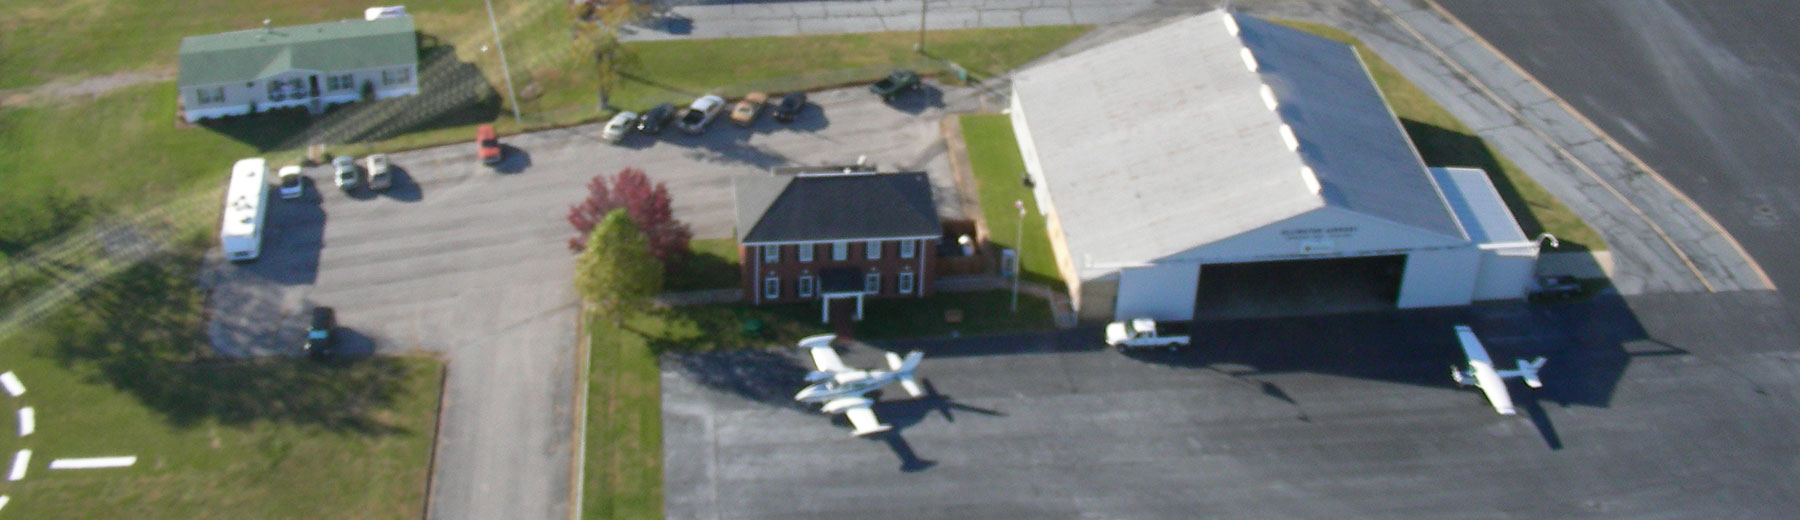 Arial View of Office Building and Hangar